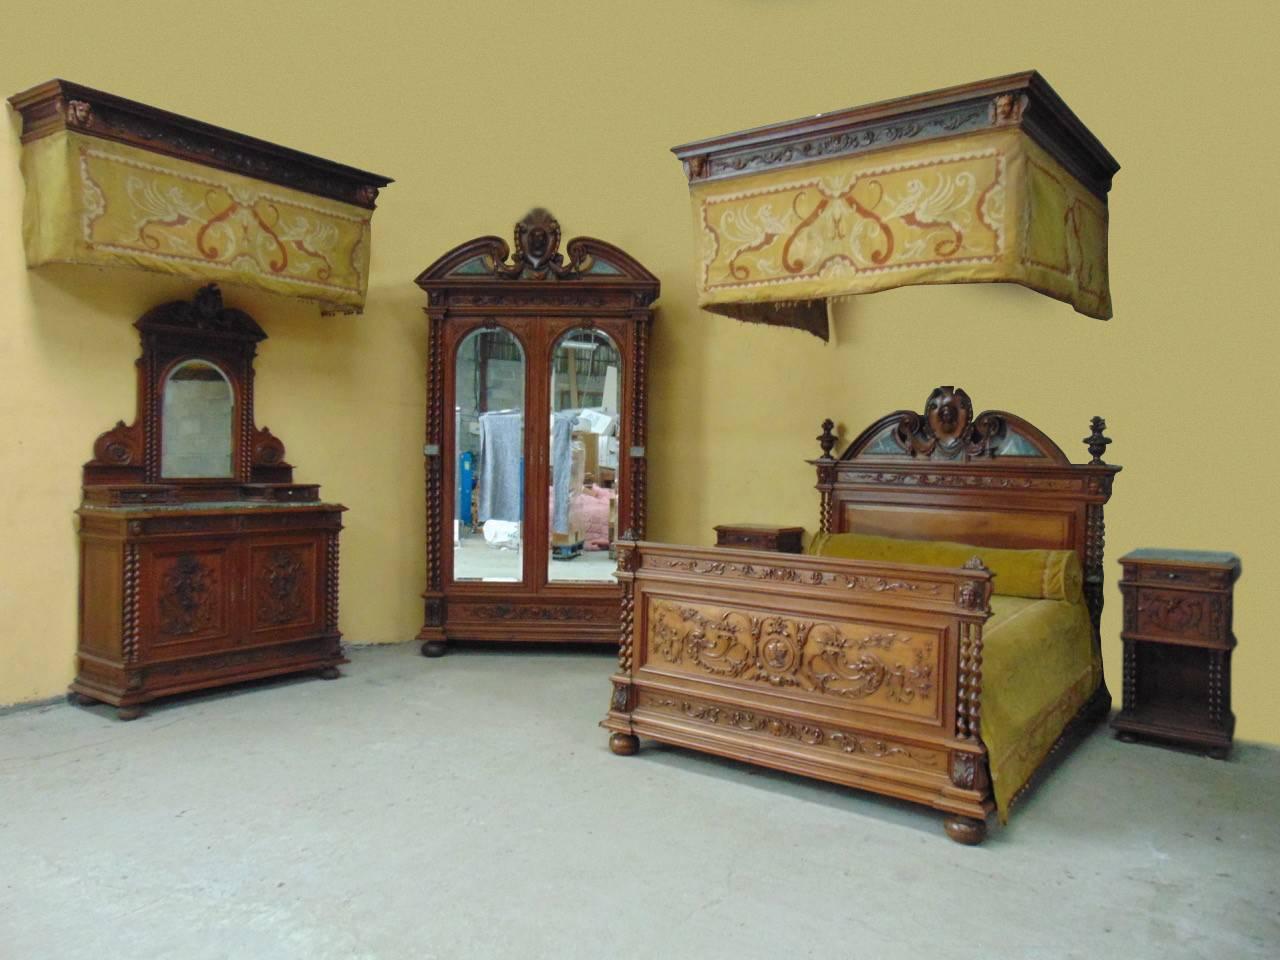 WE OFFER FREE WORLD WIDE DELIVERY ON THIS ITEM.
1900 Paris Exhibition seven-piece museum quality Renaissance Revival bedroom set, circa 1900.
This beautiful and unique bedroom set was made for the Paris Exhibition of 1900 where it was bought by the